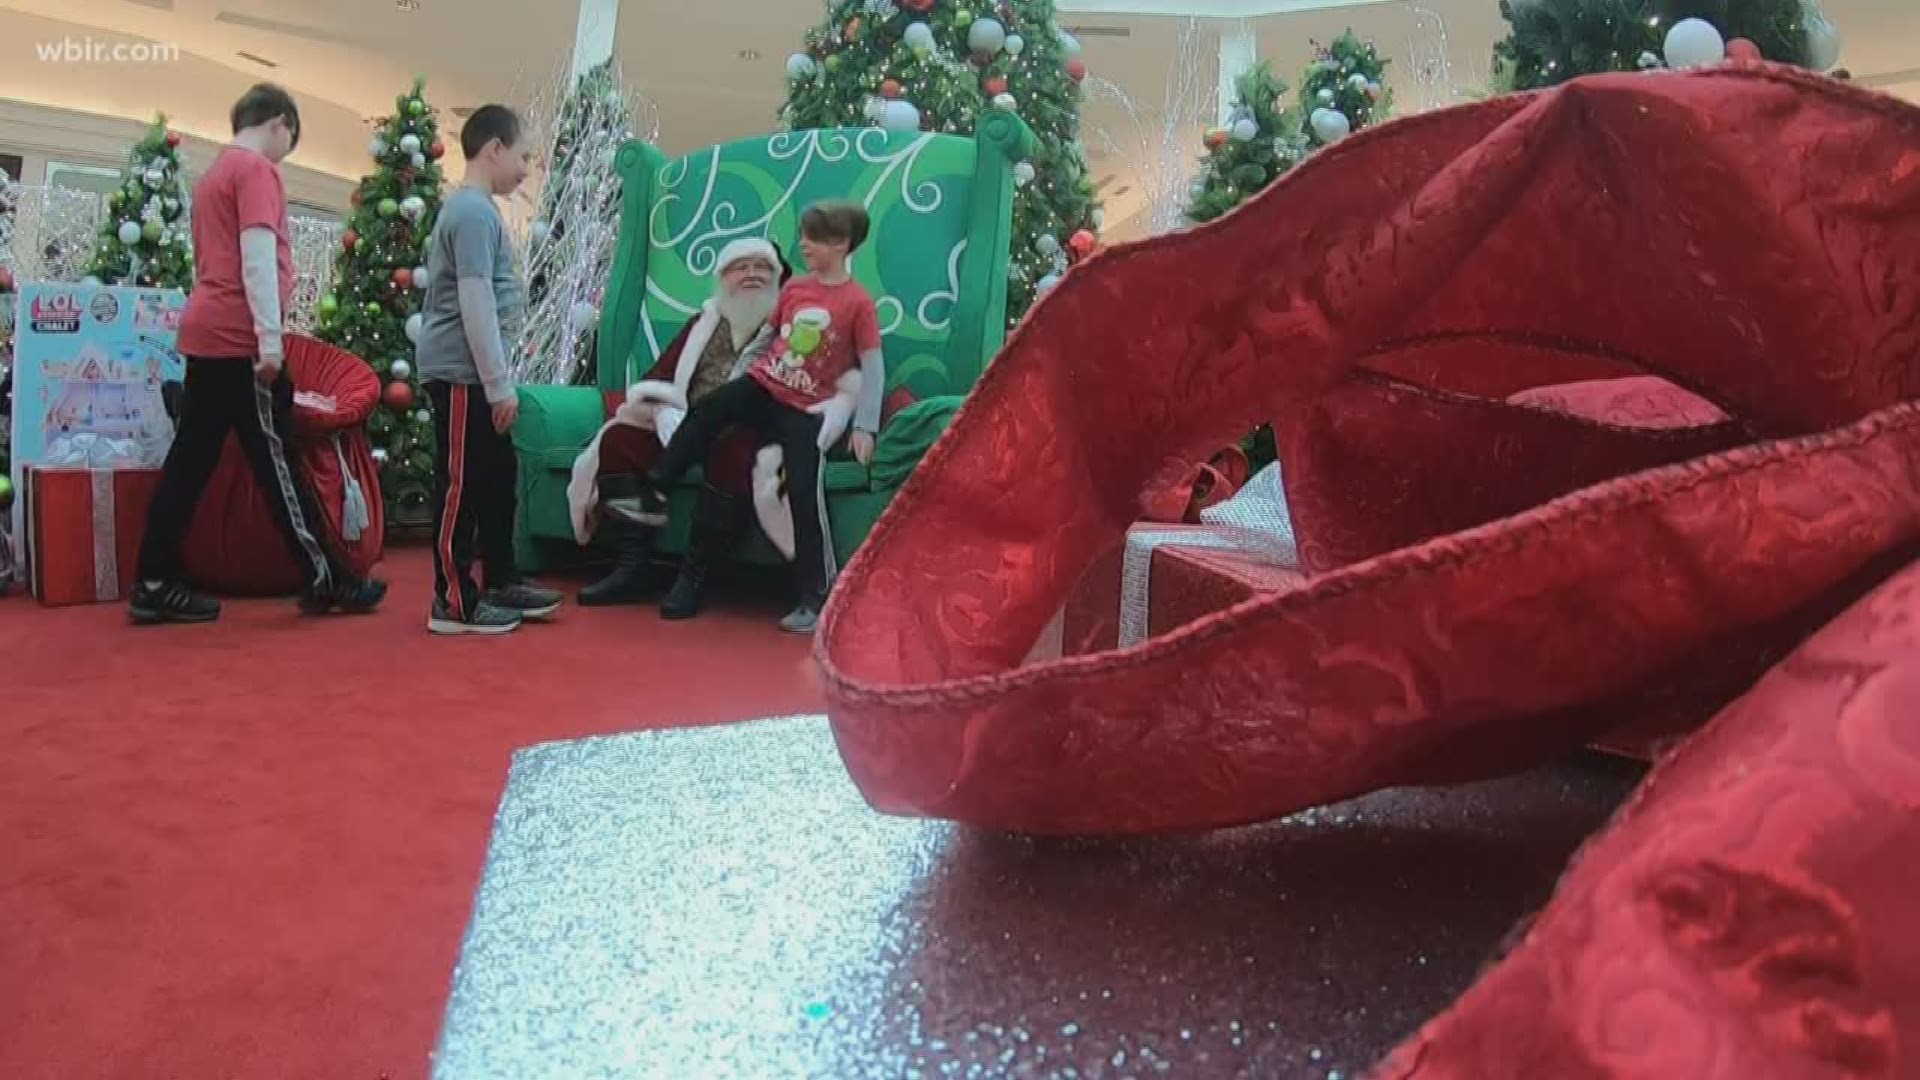 West Town Mall has offered the "Caring Santa" event for eight years. Saint Nick visits before the mall opens, so families don't have to face crowds.